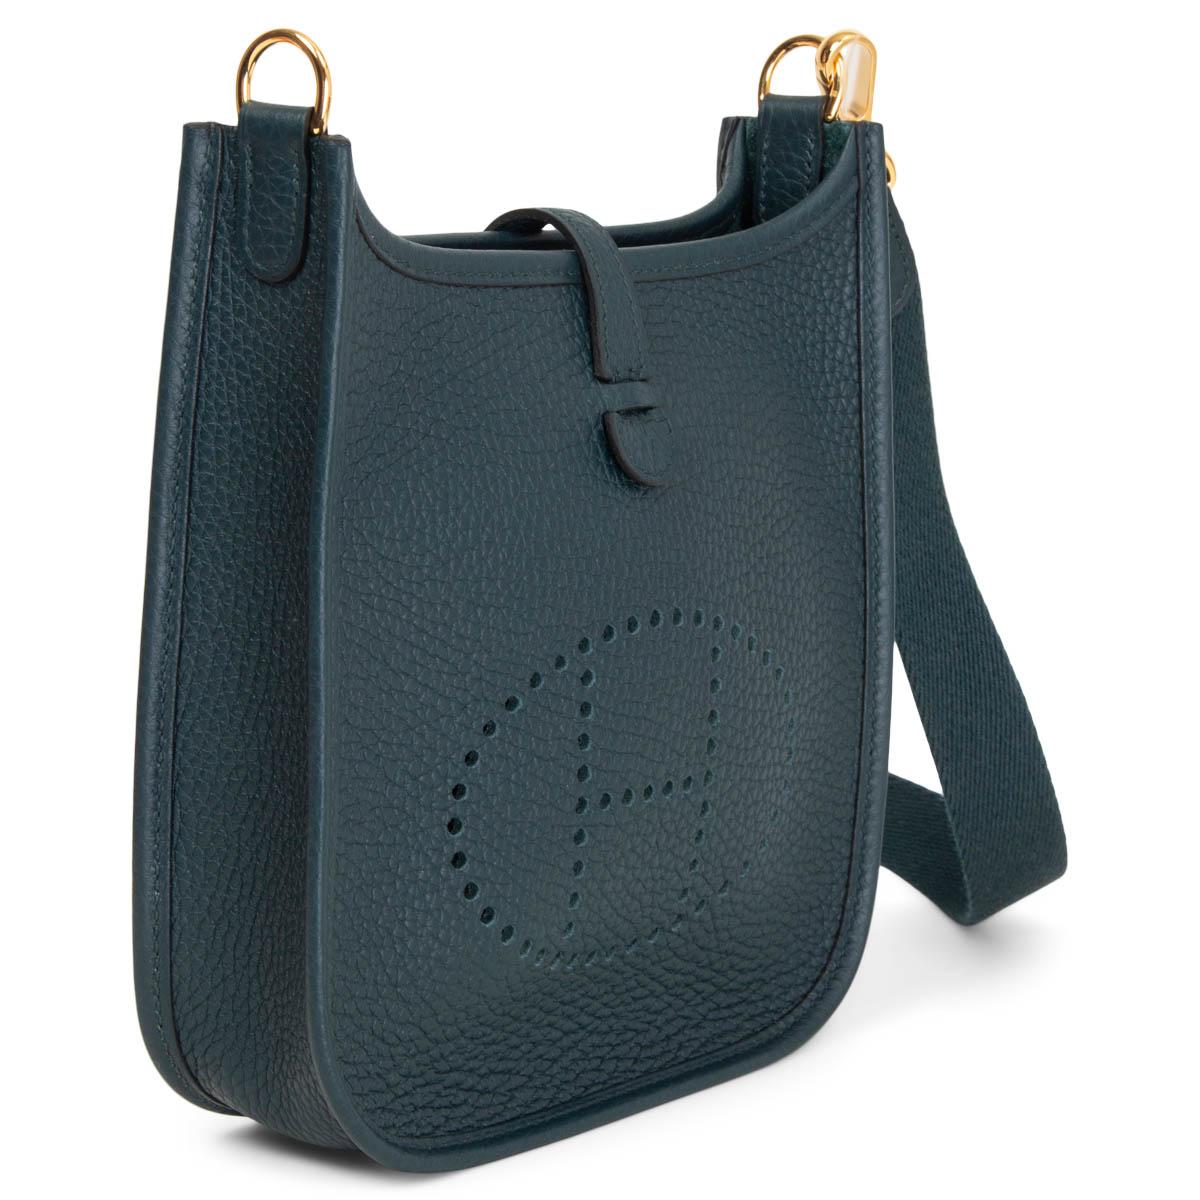 100% authentic Hermès Evelyne 16 Amazone crossbody bag in Cypress (pine green) Taurillon Clemence leather with sangle wool strap in petrol blue, perforated leather 